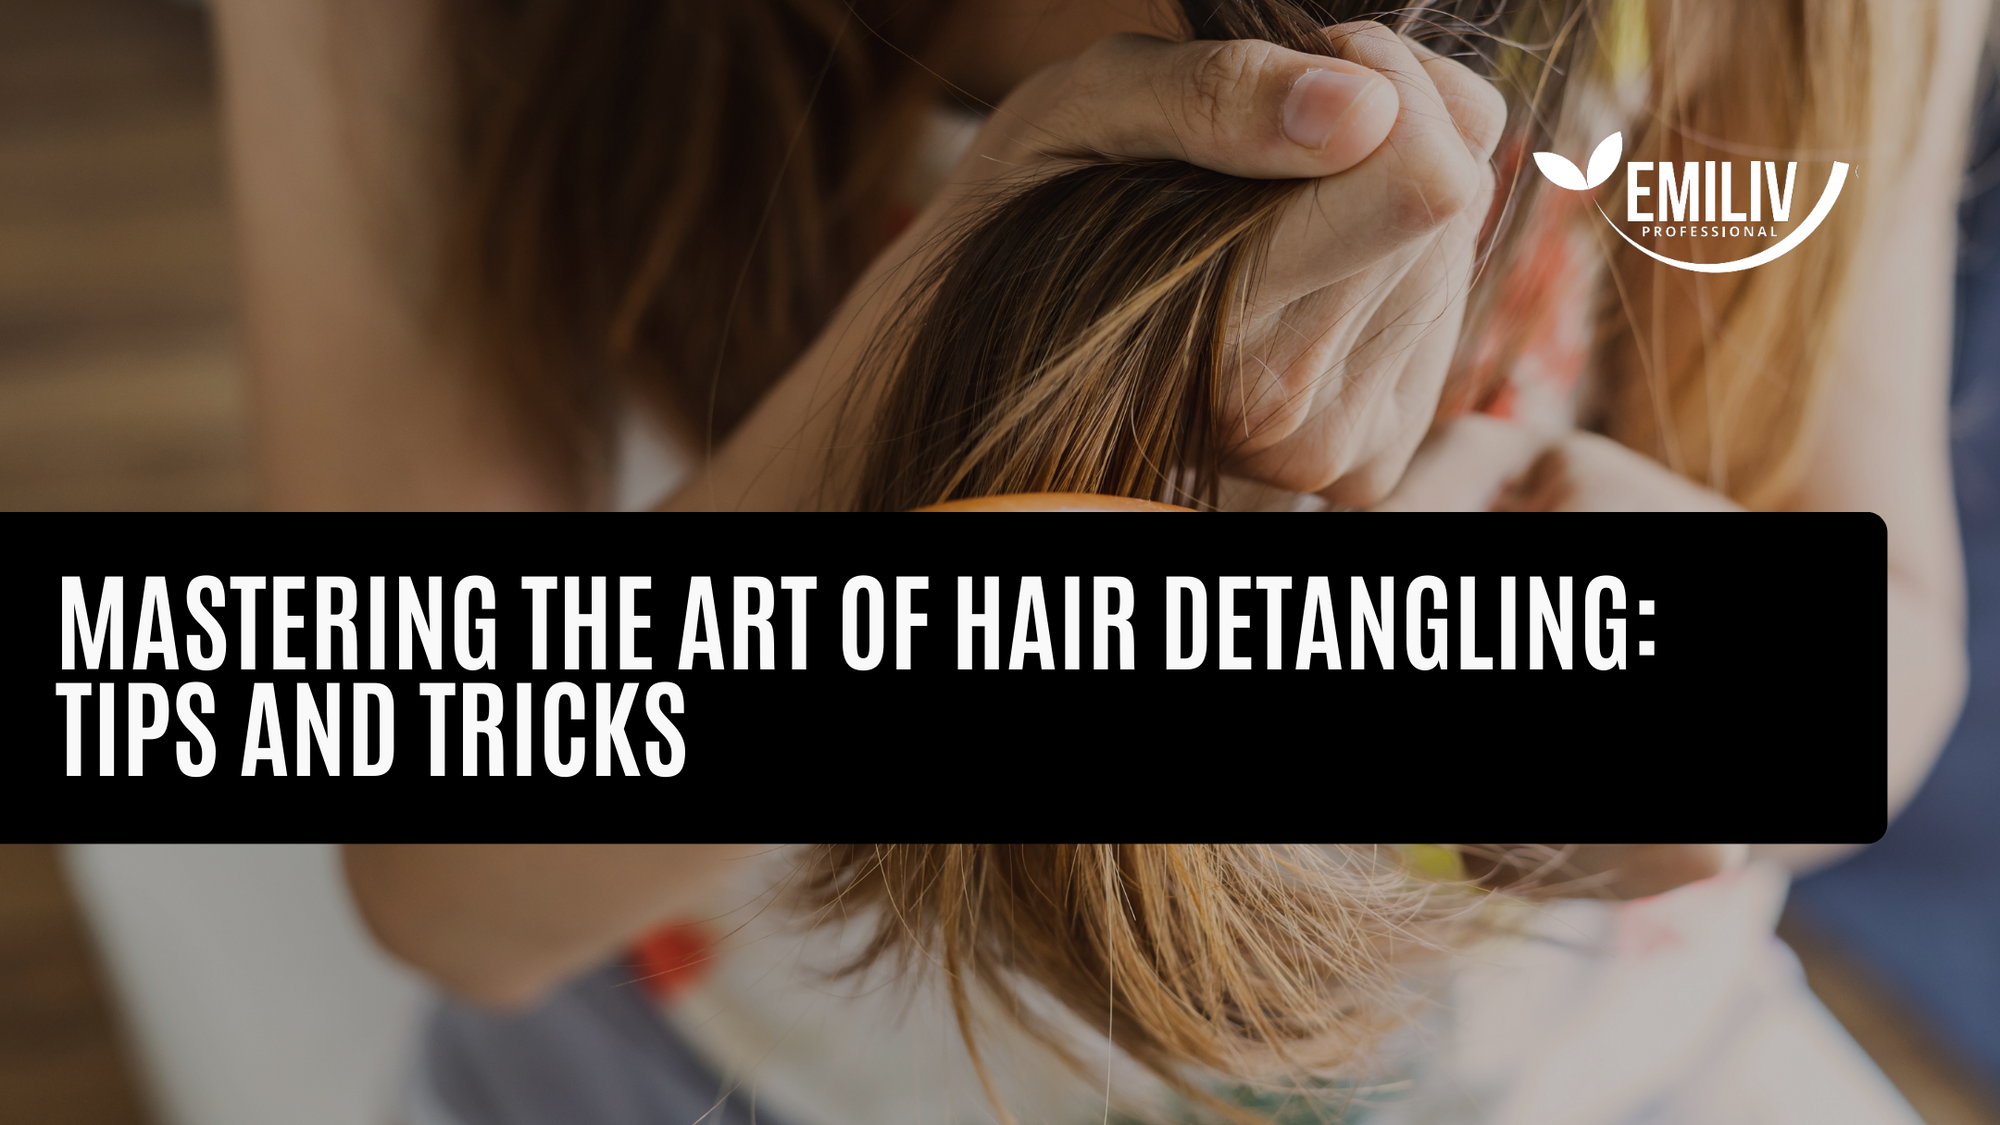 Mastering the Art of Hair Detangling: Tips and Tricks